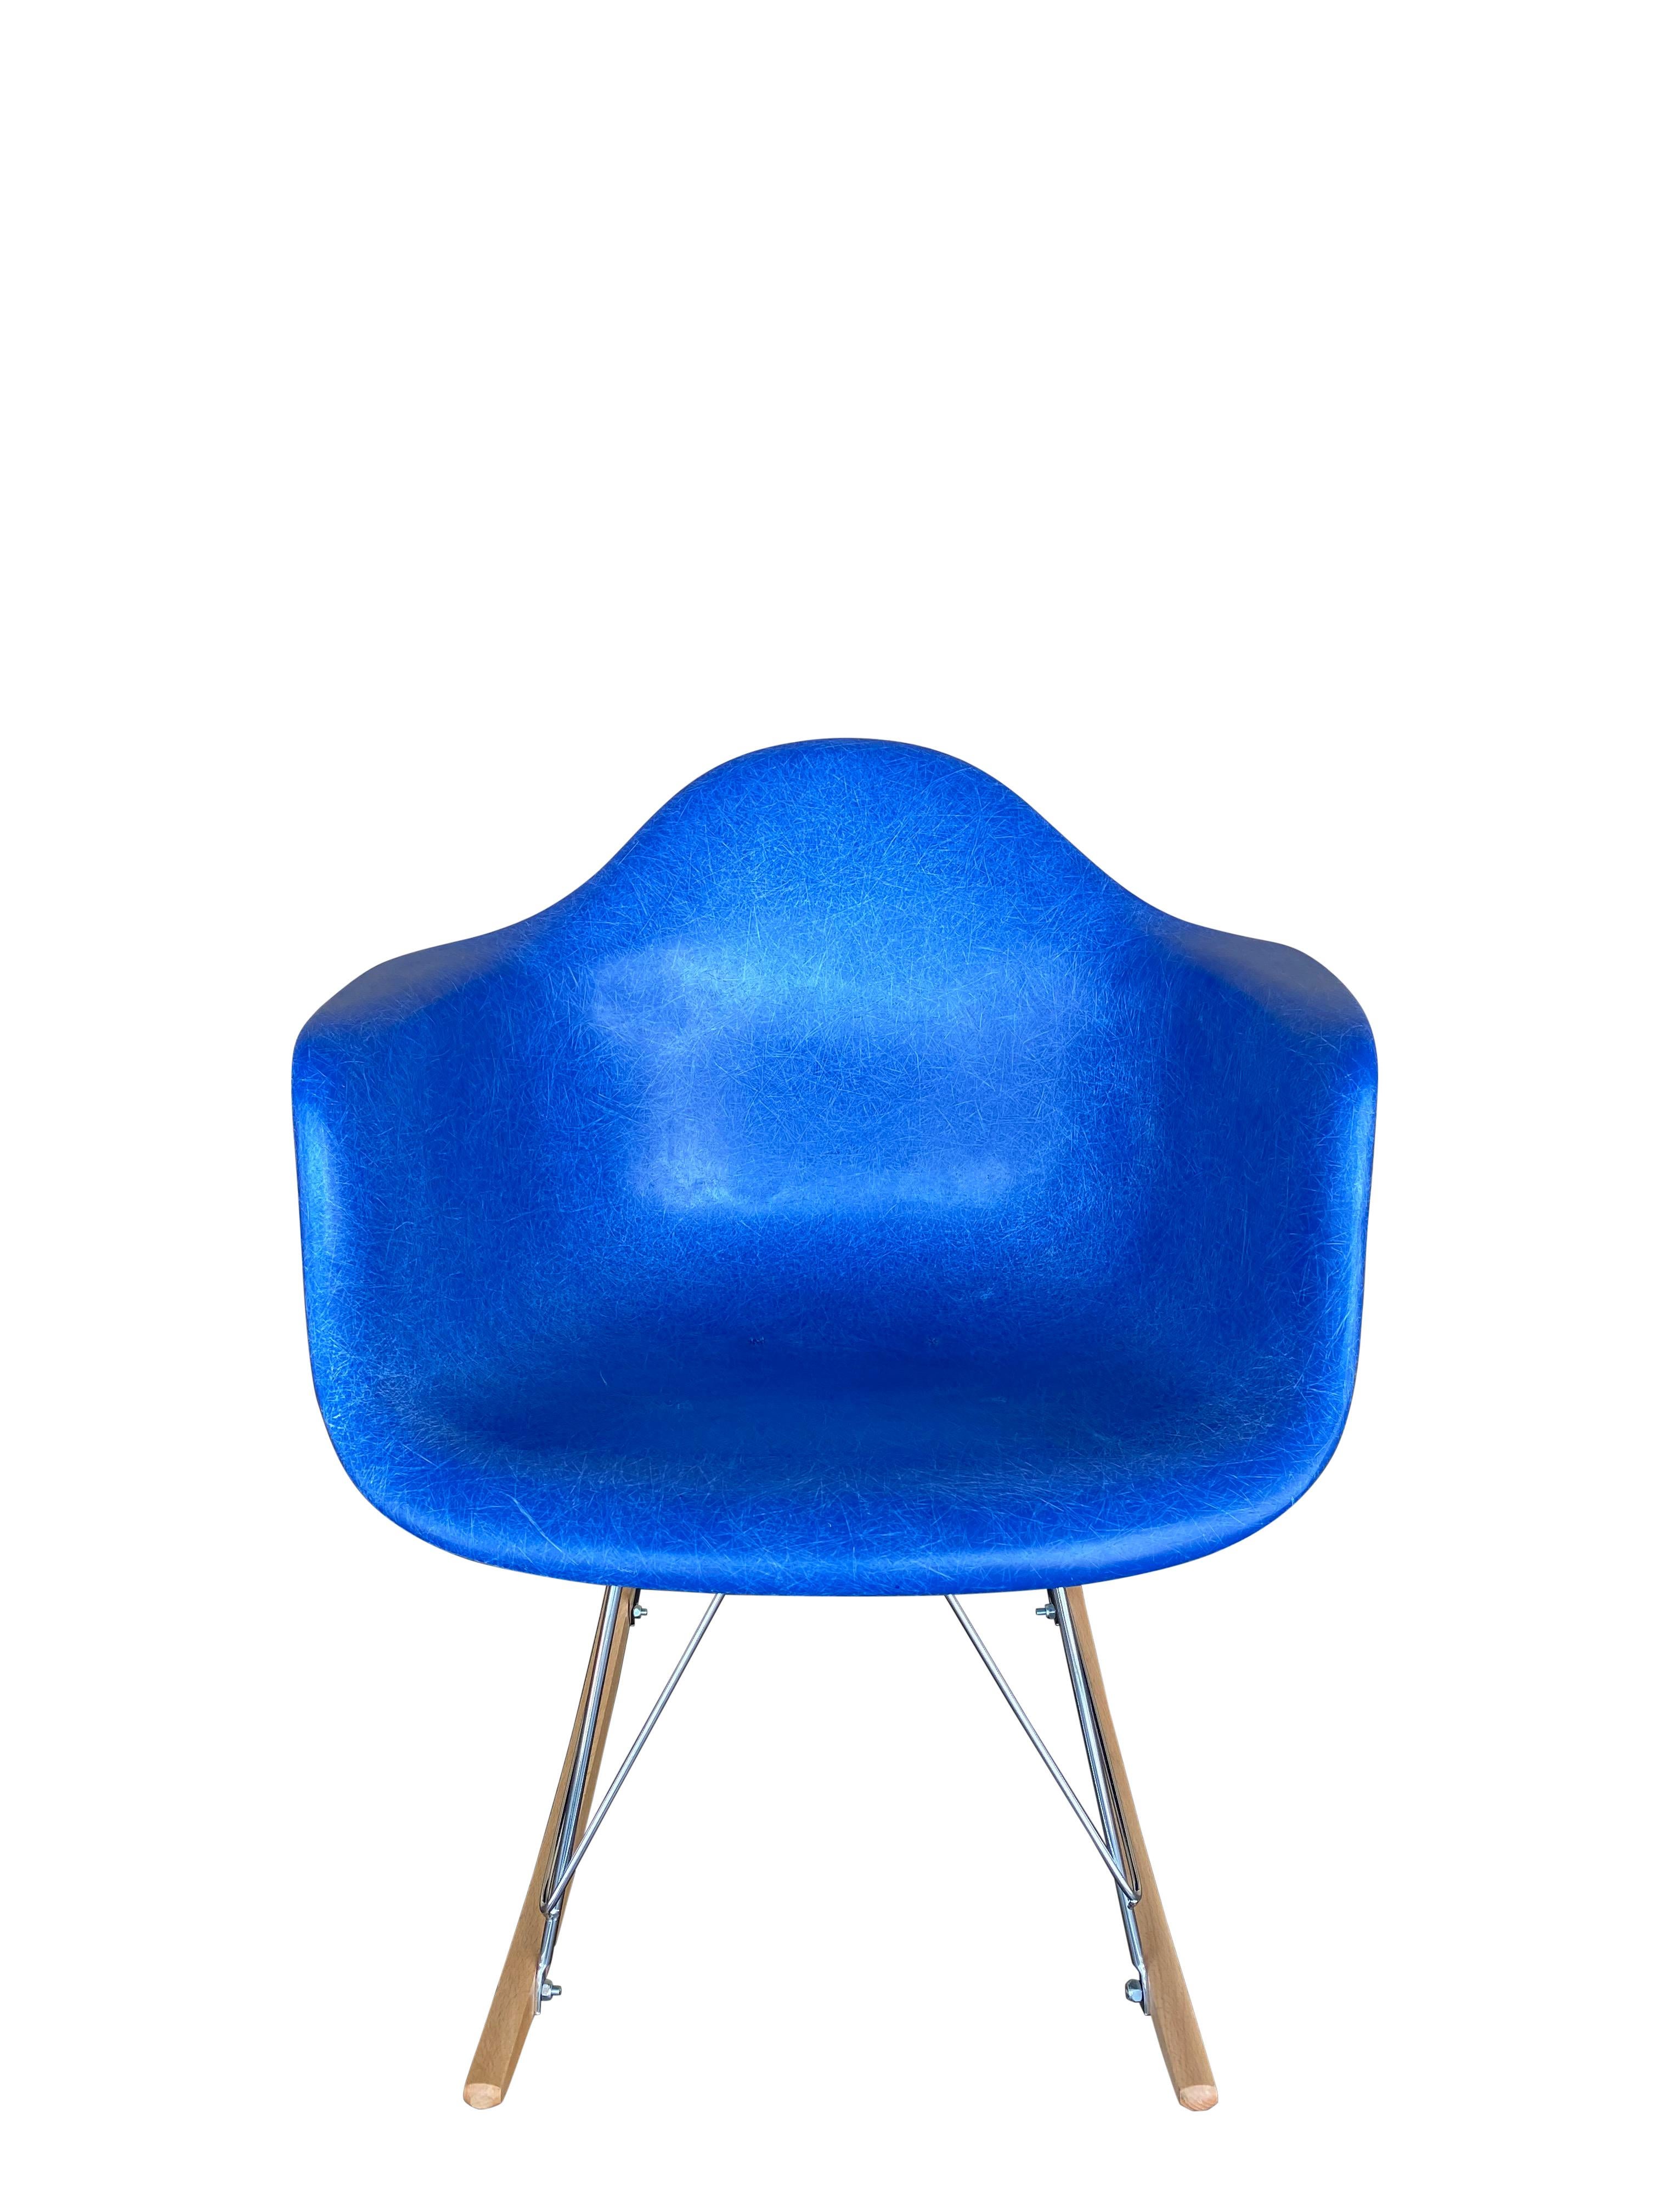 Vintage Herman Miller Eames fiberglass rocker, modern RAR. Vintage shell circa 1970s on newer rocker base. Bright and vibrant aquamarine blue shell with even color. New shock mounts installed. Signed and guaranteed authentic. No cracks or major edge